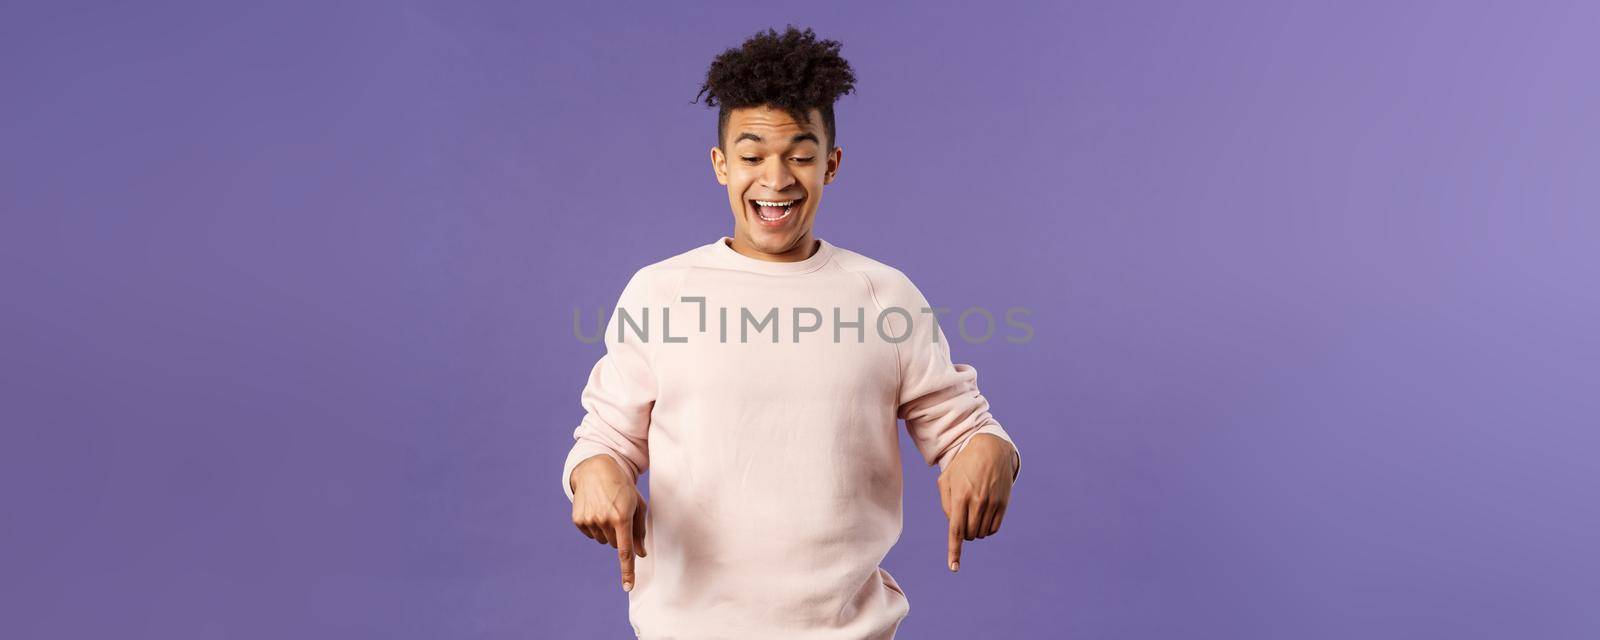 Joyful good-looking hipster guy with dreads rejoicing over good news, best deal ever in online store, favorite game finally in stock, pointing fingers down and rejoicing, purple background.